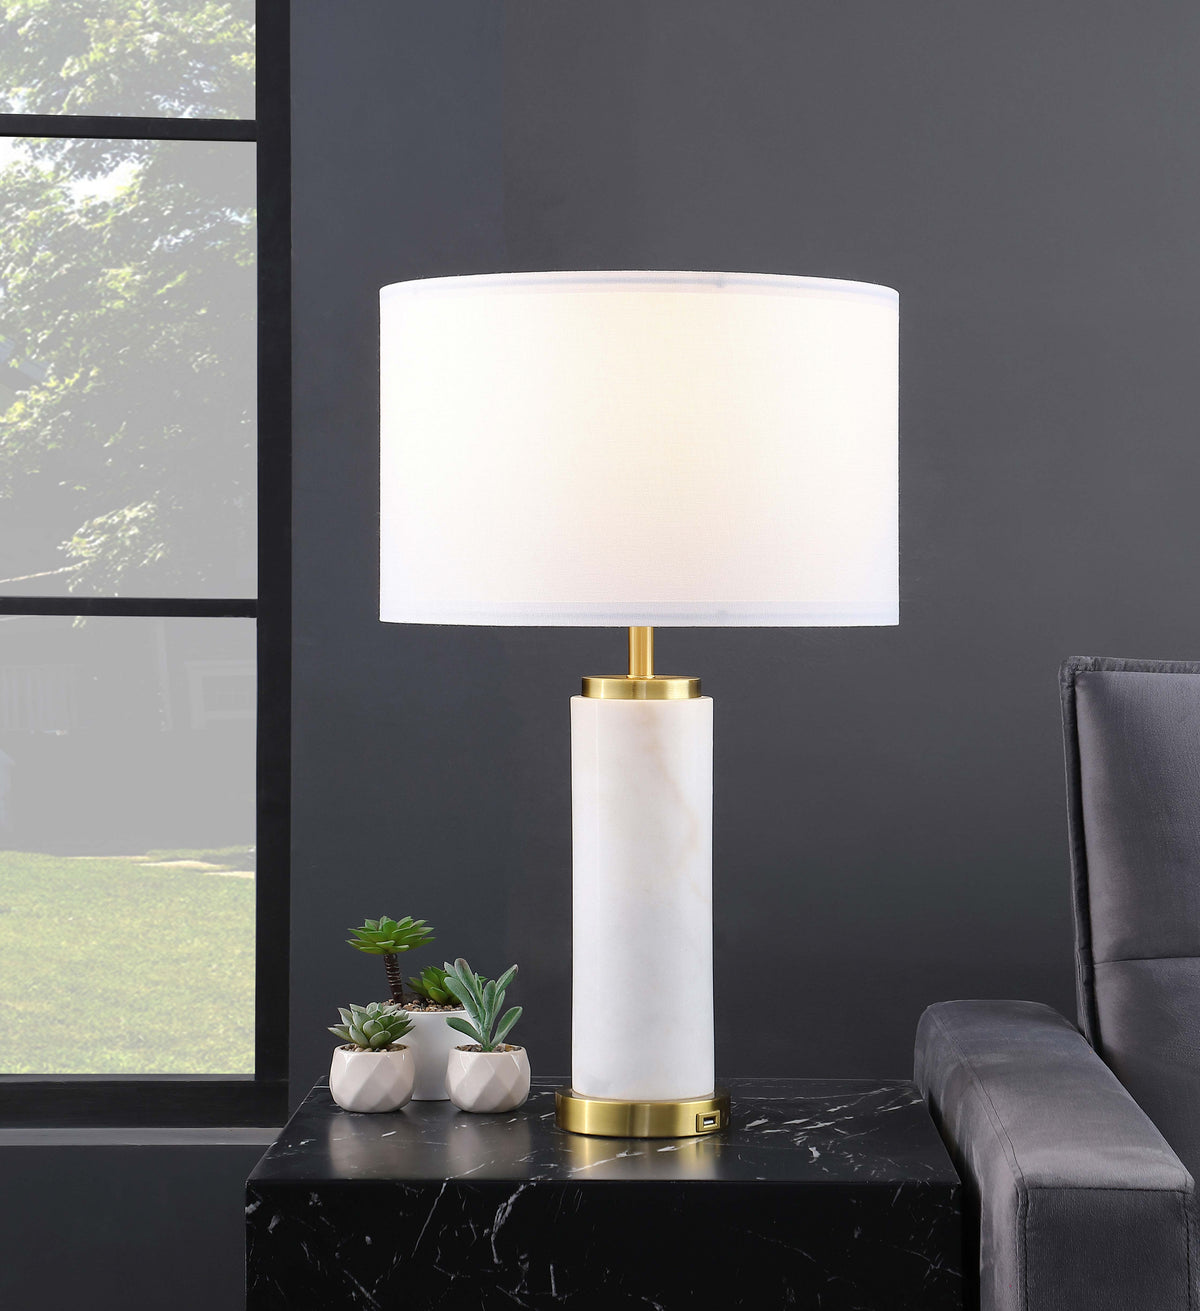 Lucius Drum Shade Bedside Table Lamp White and Gold Lucius Drum Shade Bedside Table Lamp White and Gold Half Price Furniture